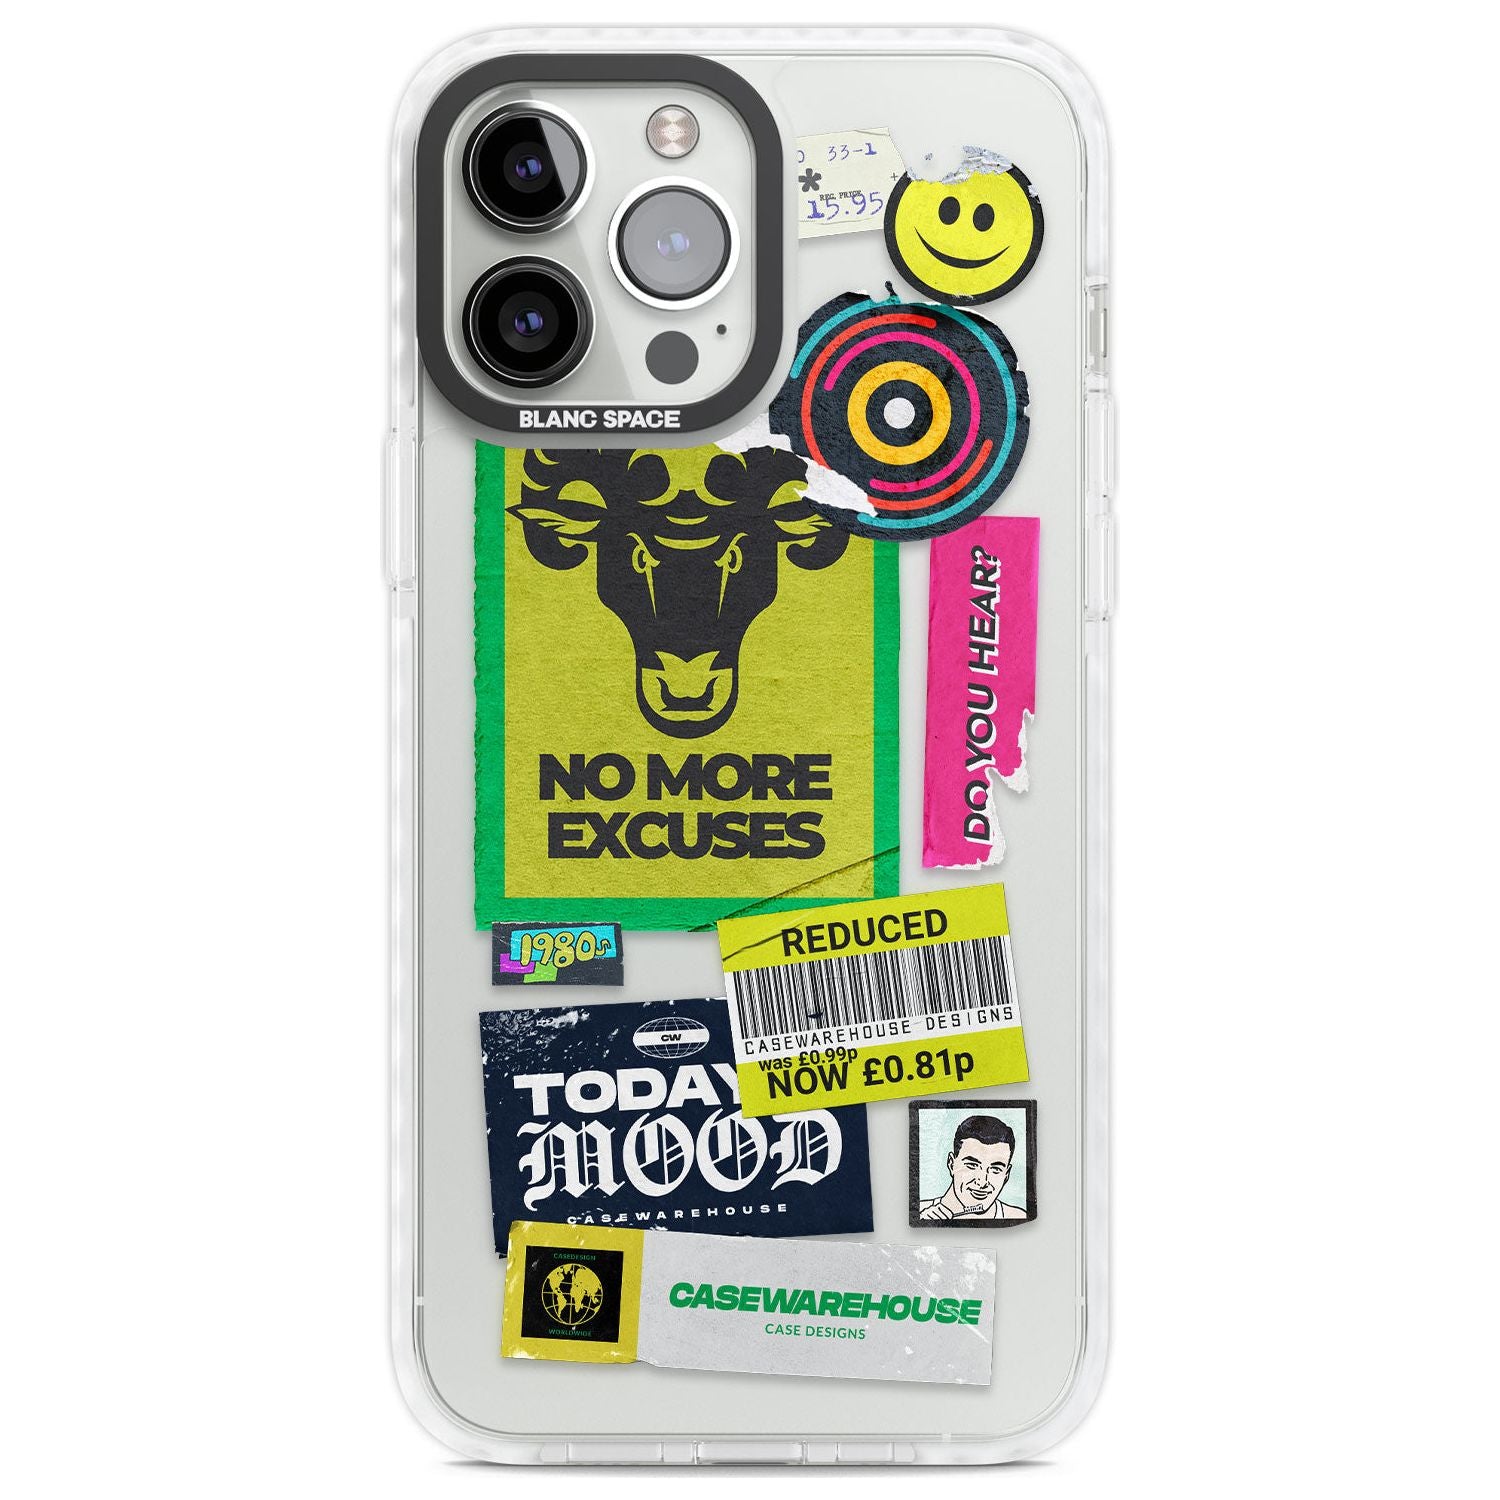 No More Excuses Sticker Mix Phone Case iPhone 13 Pro Max / Impact Case,iPhone 14 Pro Max / Impact Case Blanc Space